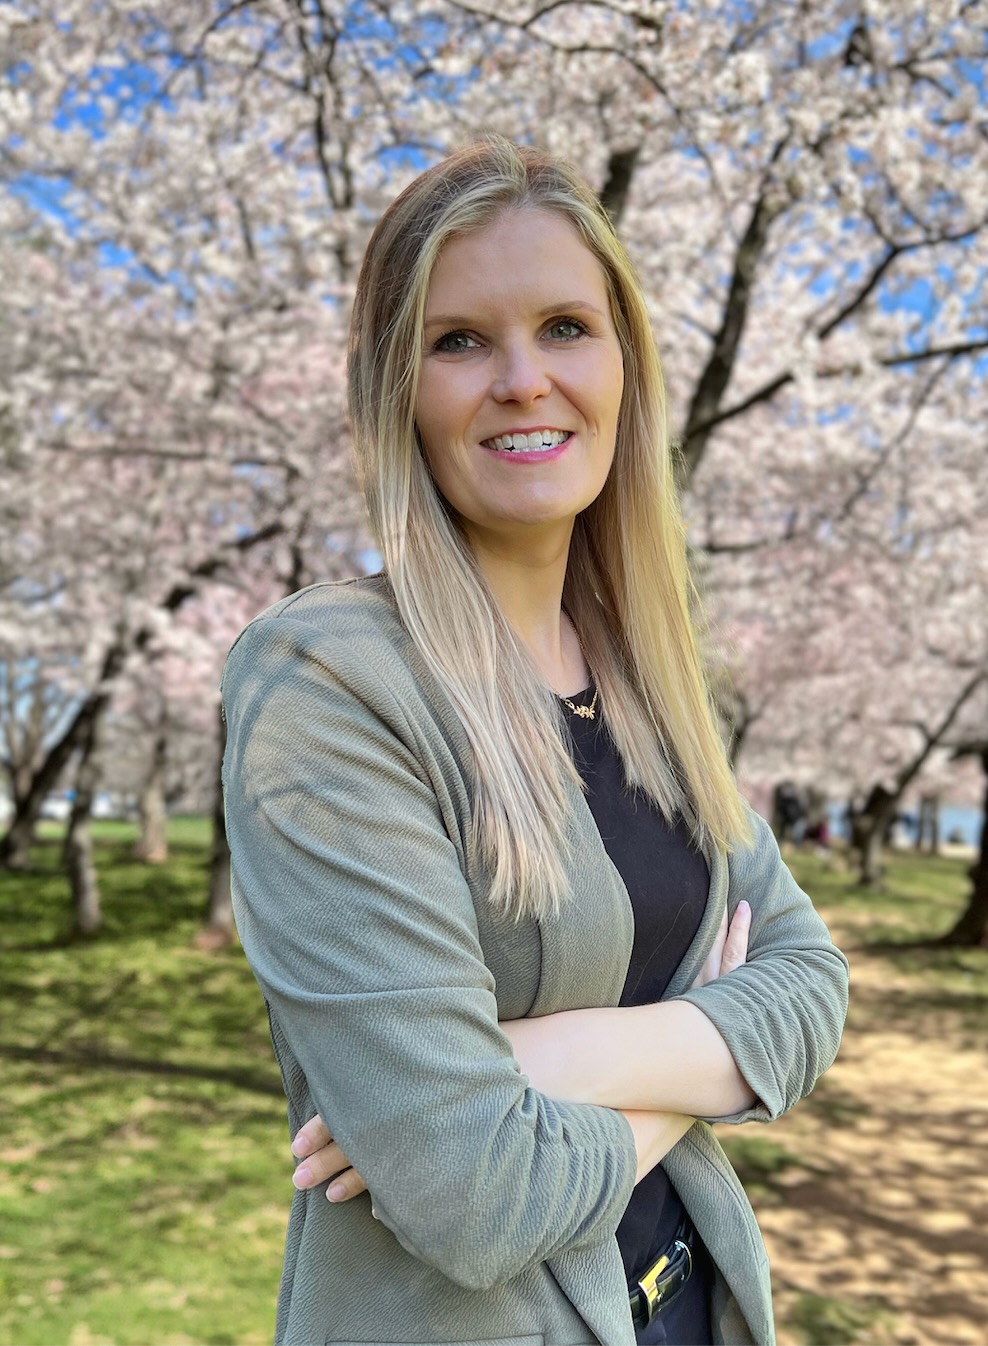 Professor Wilson-McDonald, a light-skinned woman with blonde hair, poses in front of cherry blossom trees in bloom.